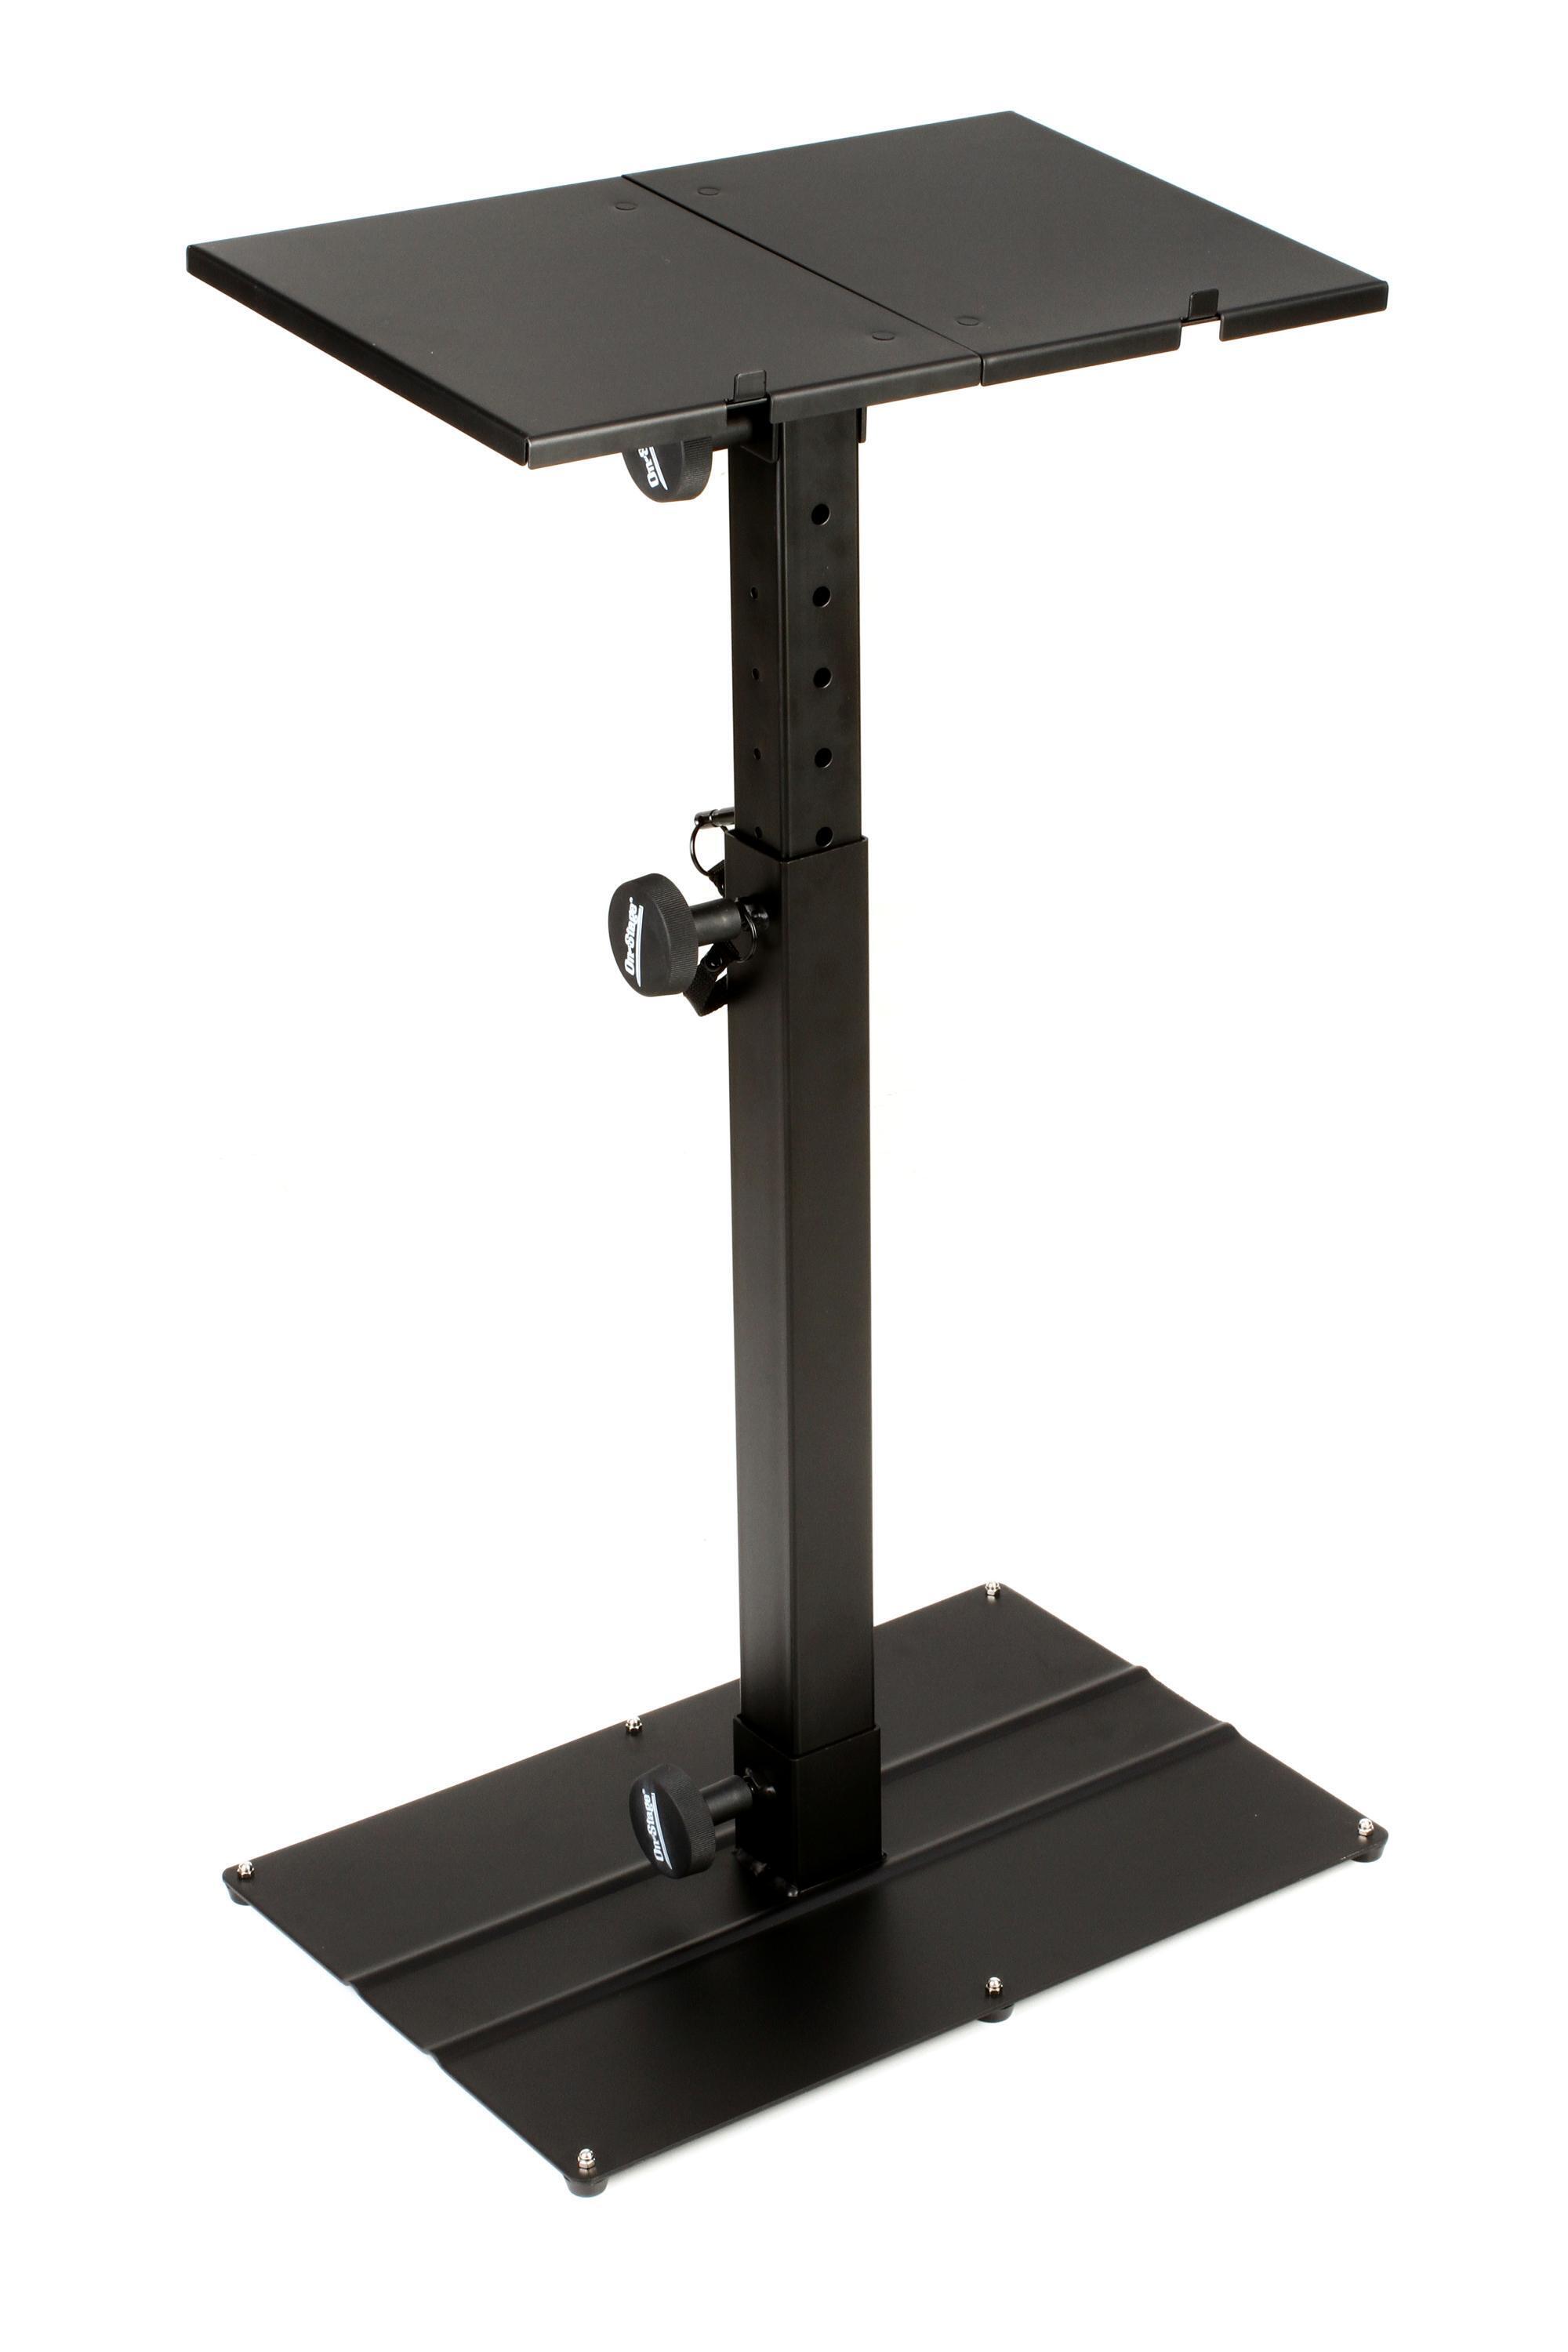 Bundled Item: On-Stage KS6150 Compact MIDI/Synth Utility Stand